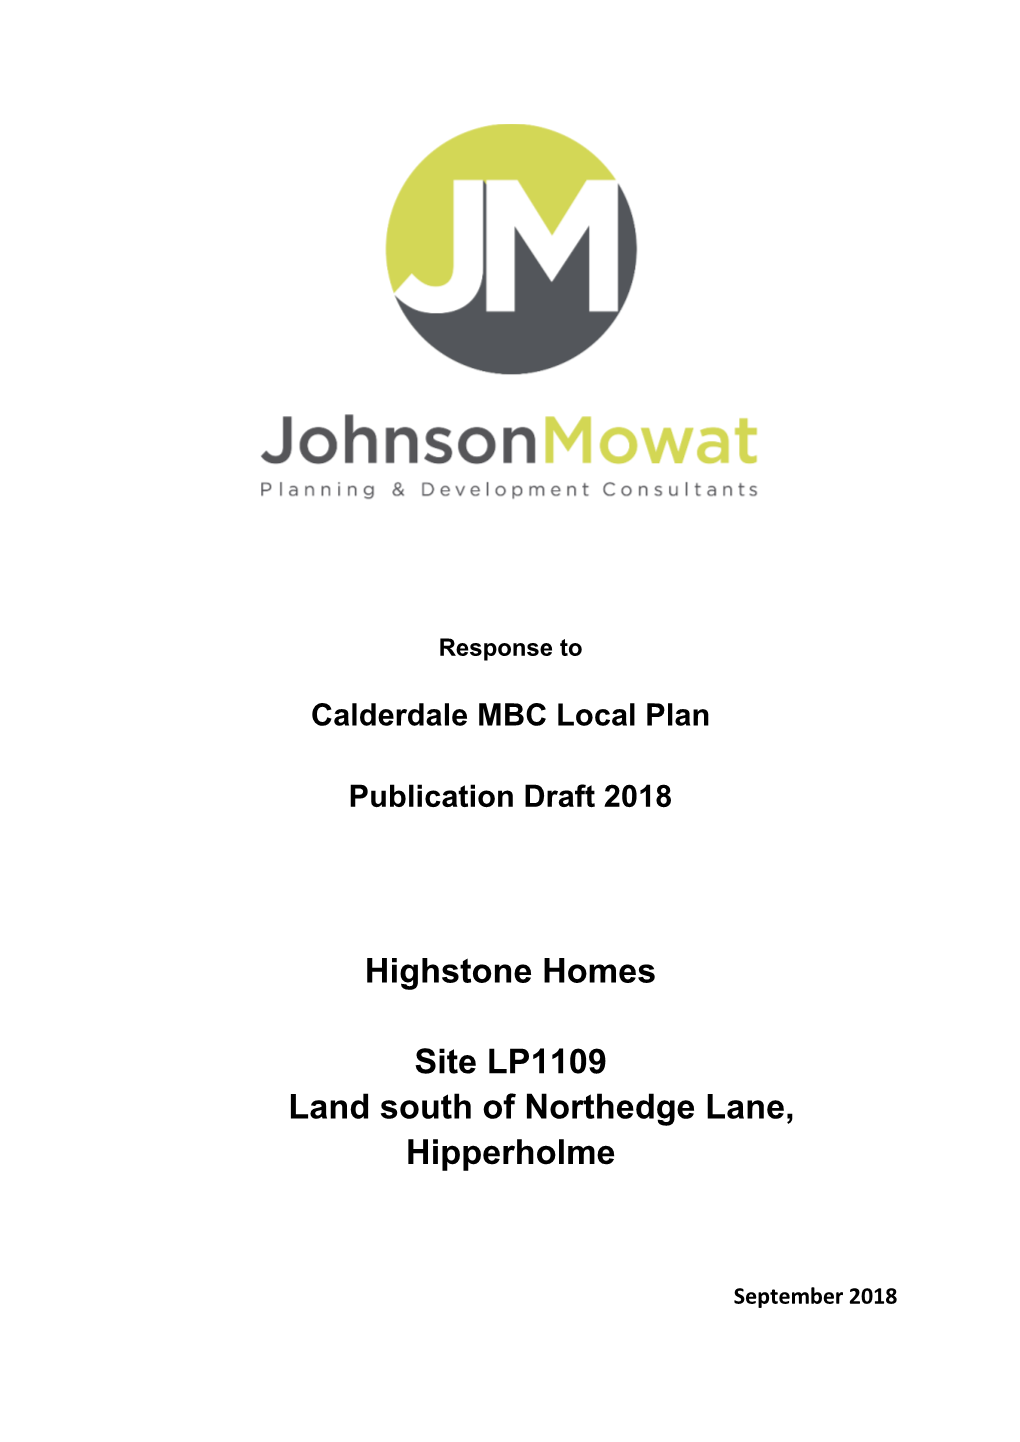 Highstone Homes Site LP1109 Land South of Northedge Lane